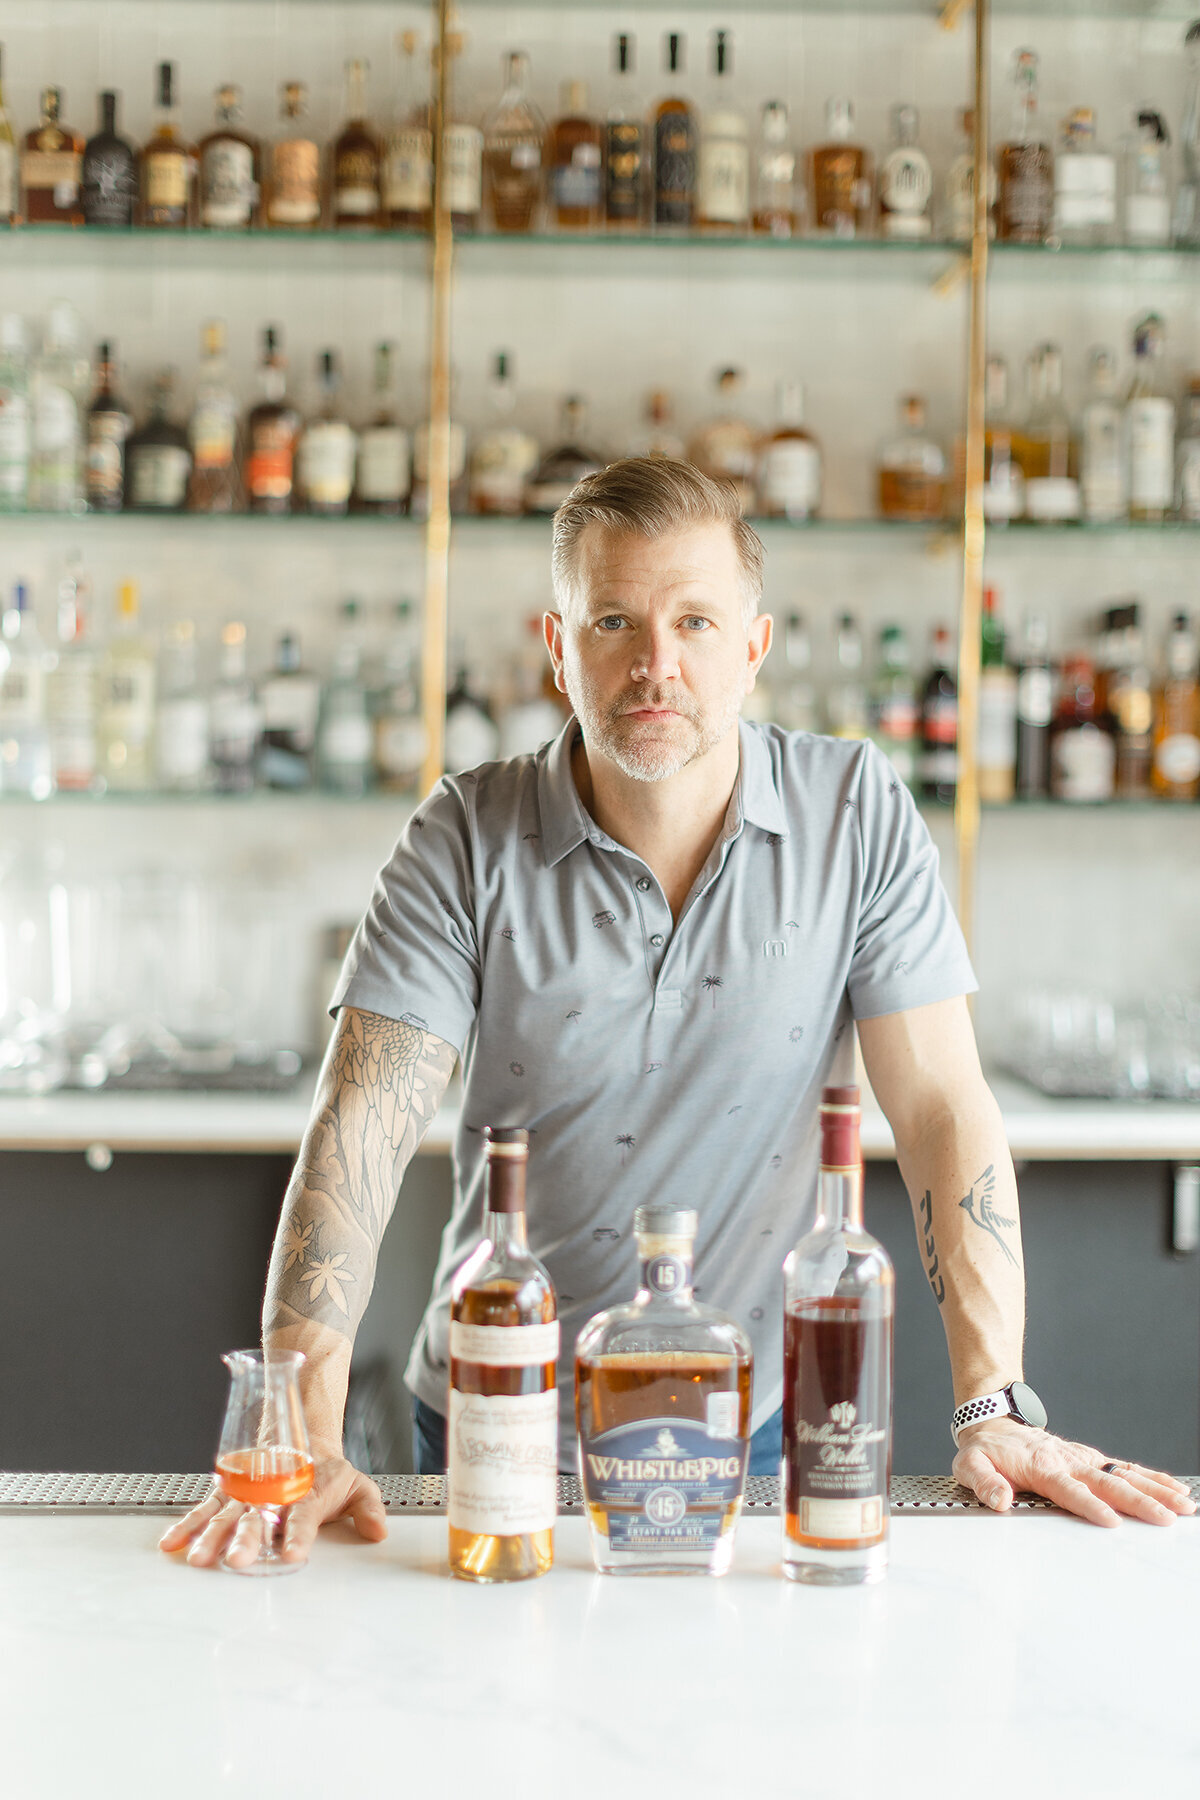 Professional headshot of a Dallas/Fort Worth business owner at his new restaurant Sip and Savor as he stands at the bar with bottles of alcohol in front of him.